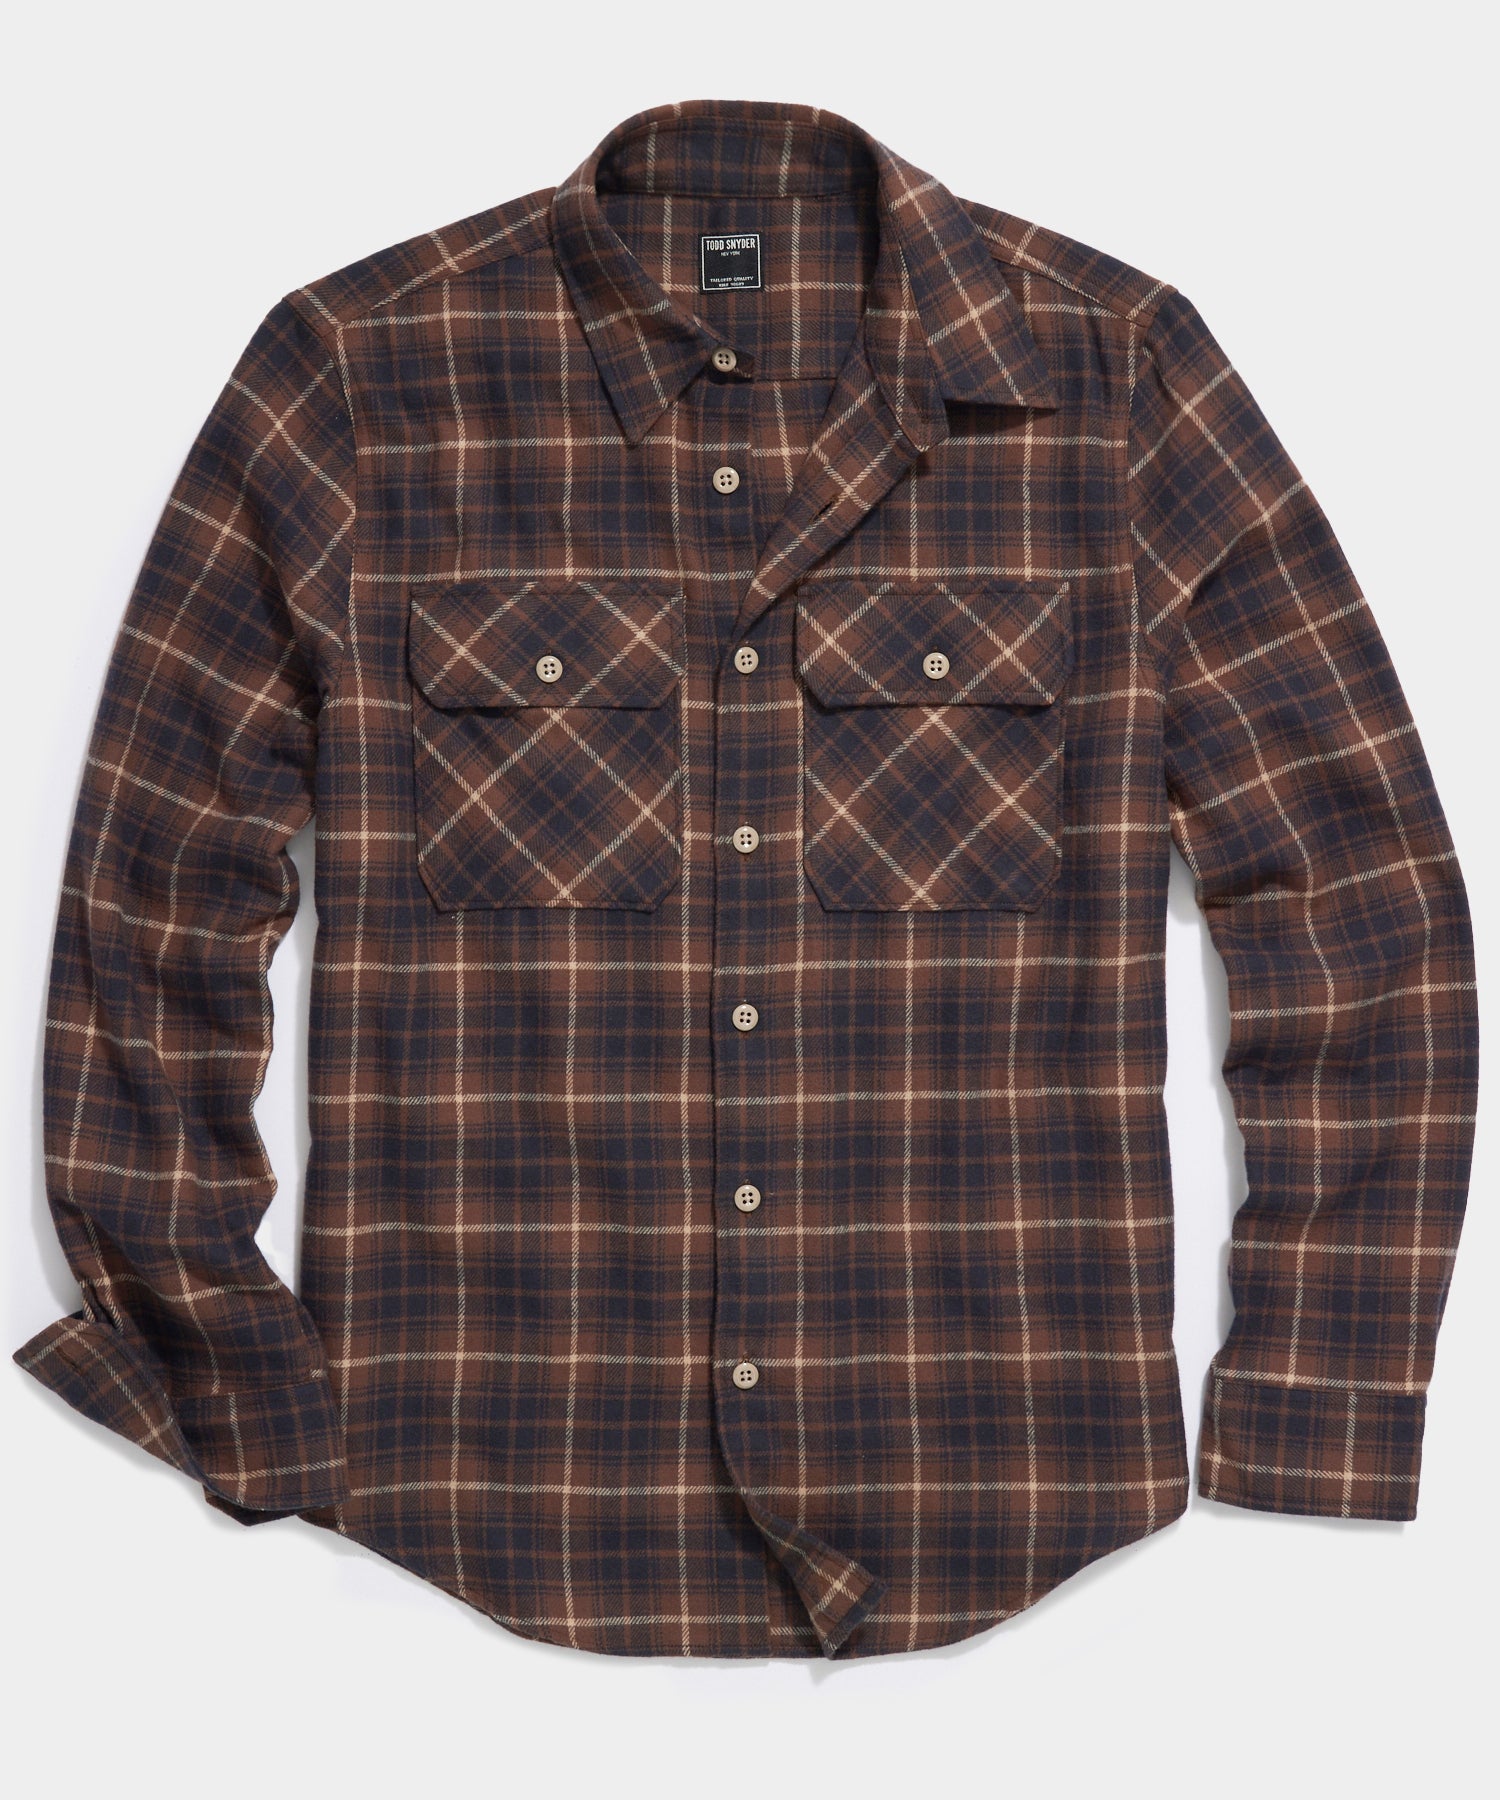 Todd Snyder - TODD SNYDER ALASKAN CHAMOIS SHIRT IN BROWN MULTI-CHECK - Rent With Thred